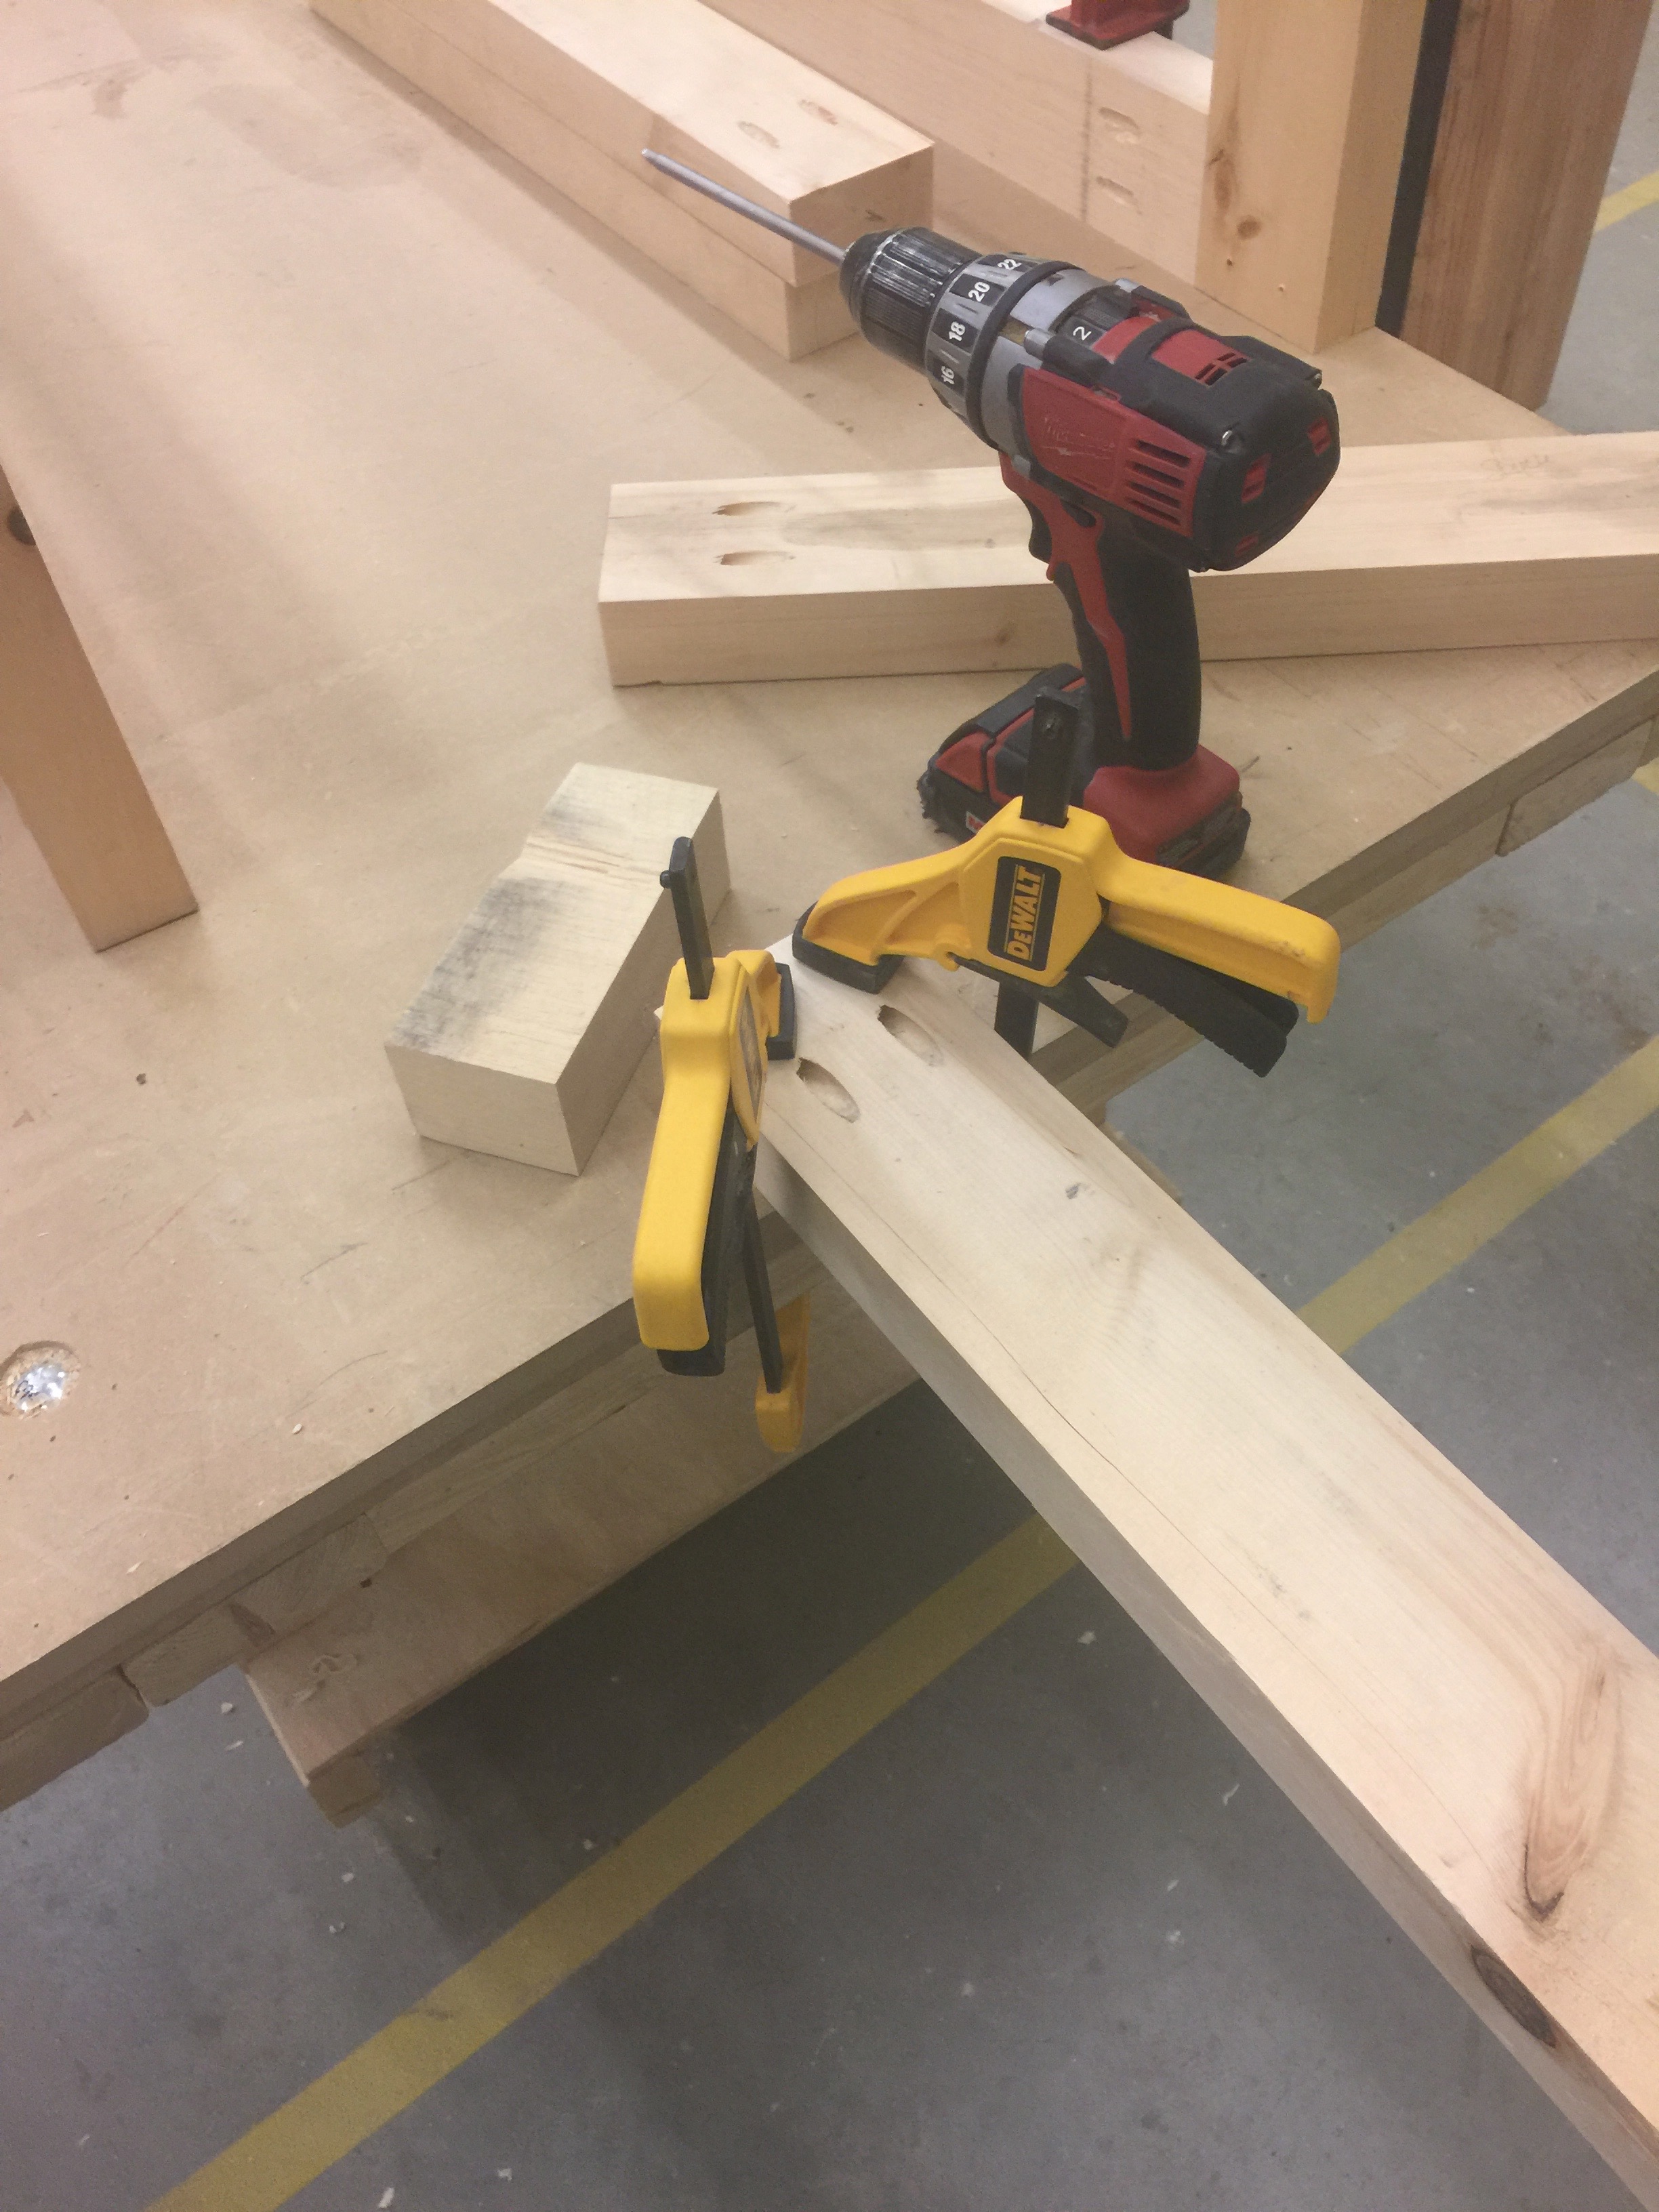 Wood clamped on a table